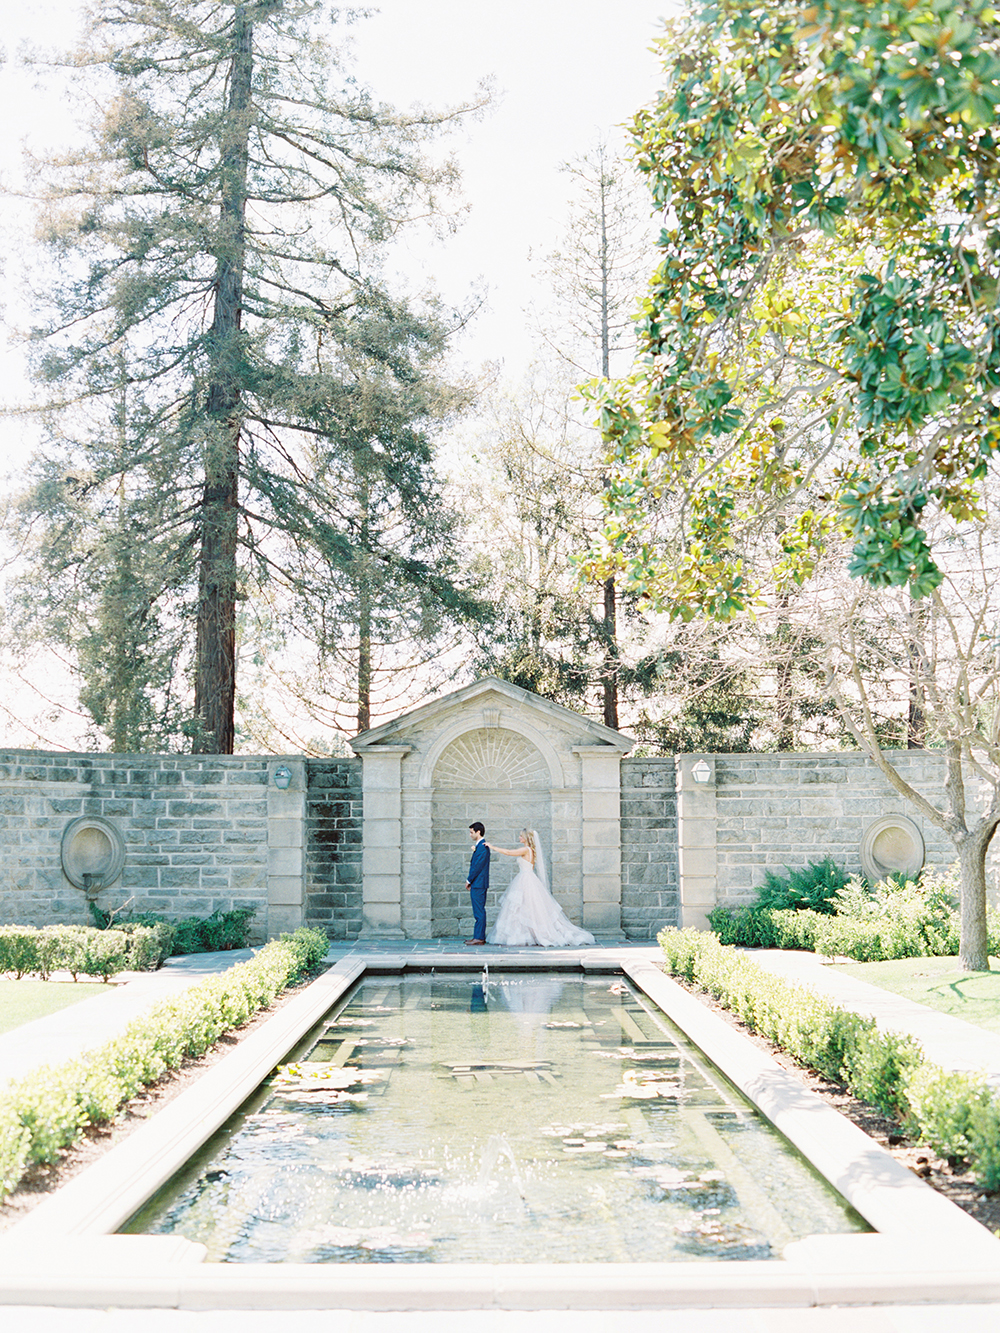 Romantic and Classic Greystone Mansion Wedding by Lucky Day Events Co. x Jordan Galindo Photography // First Look Photos